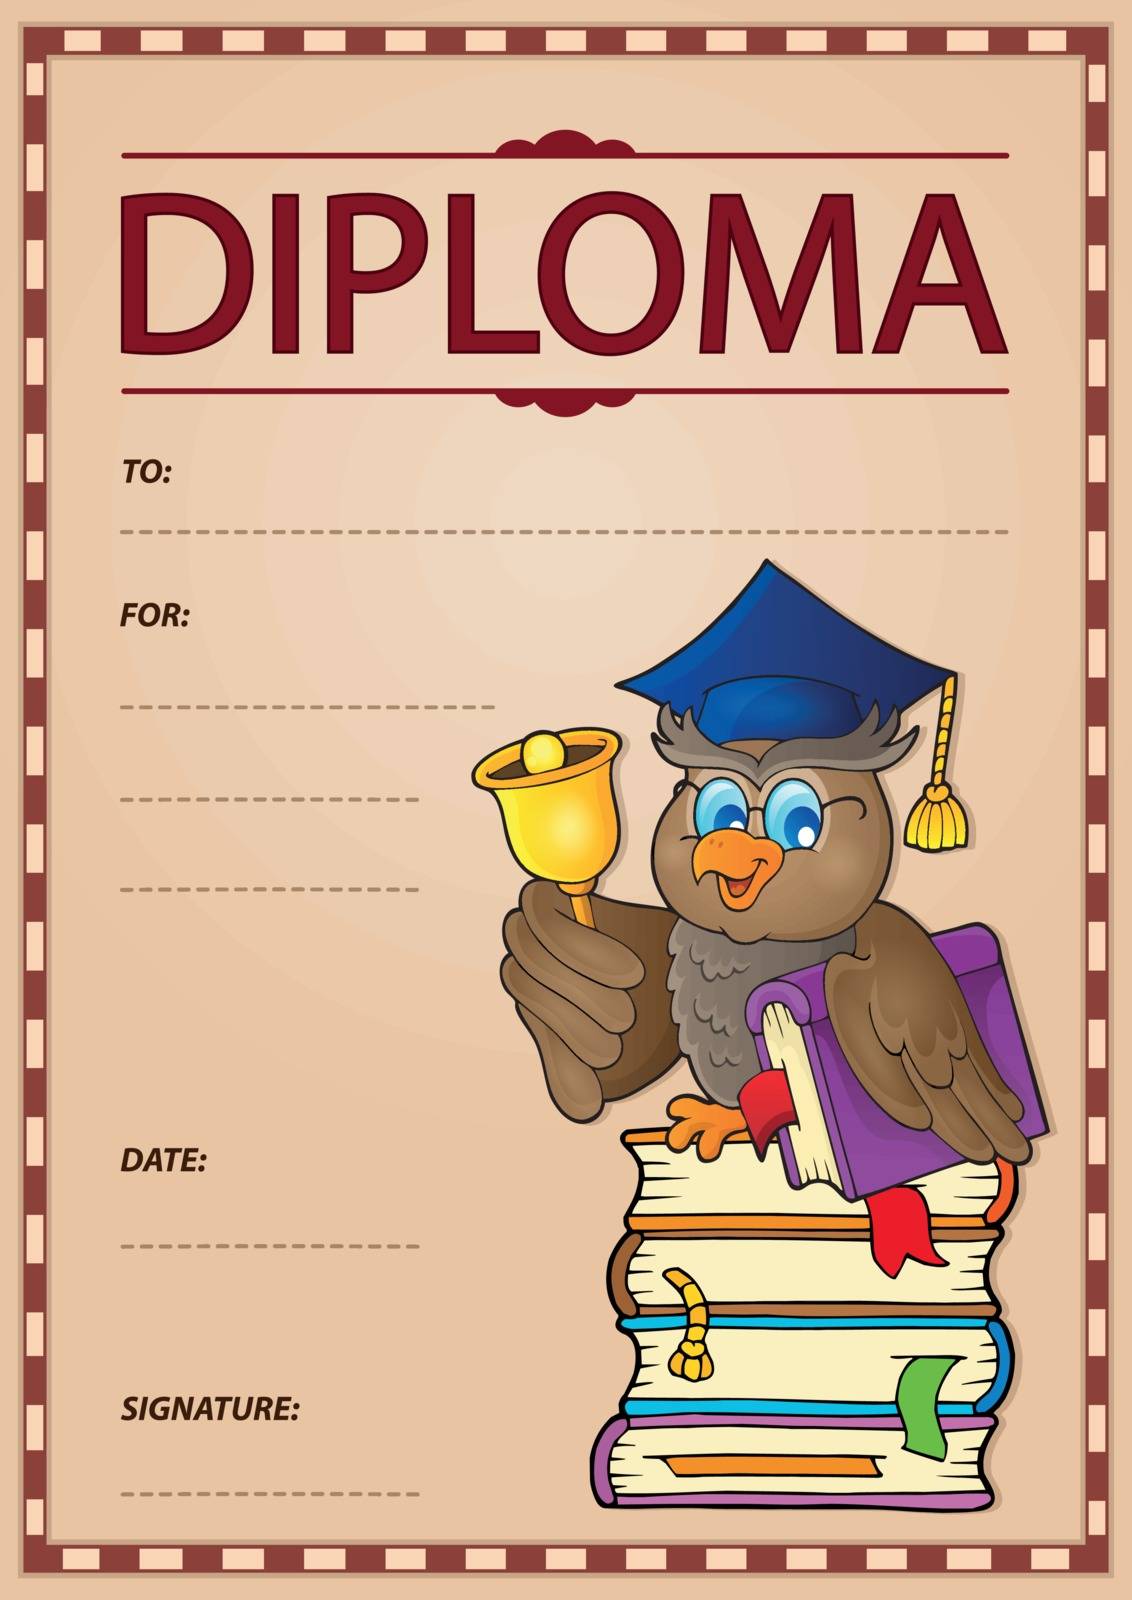 Diploma subject image 9 by clairev